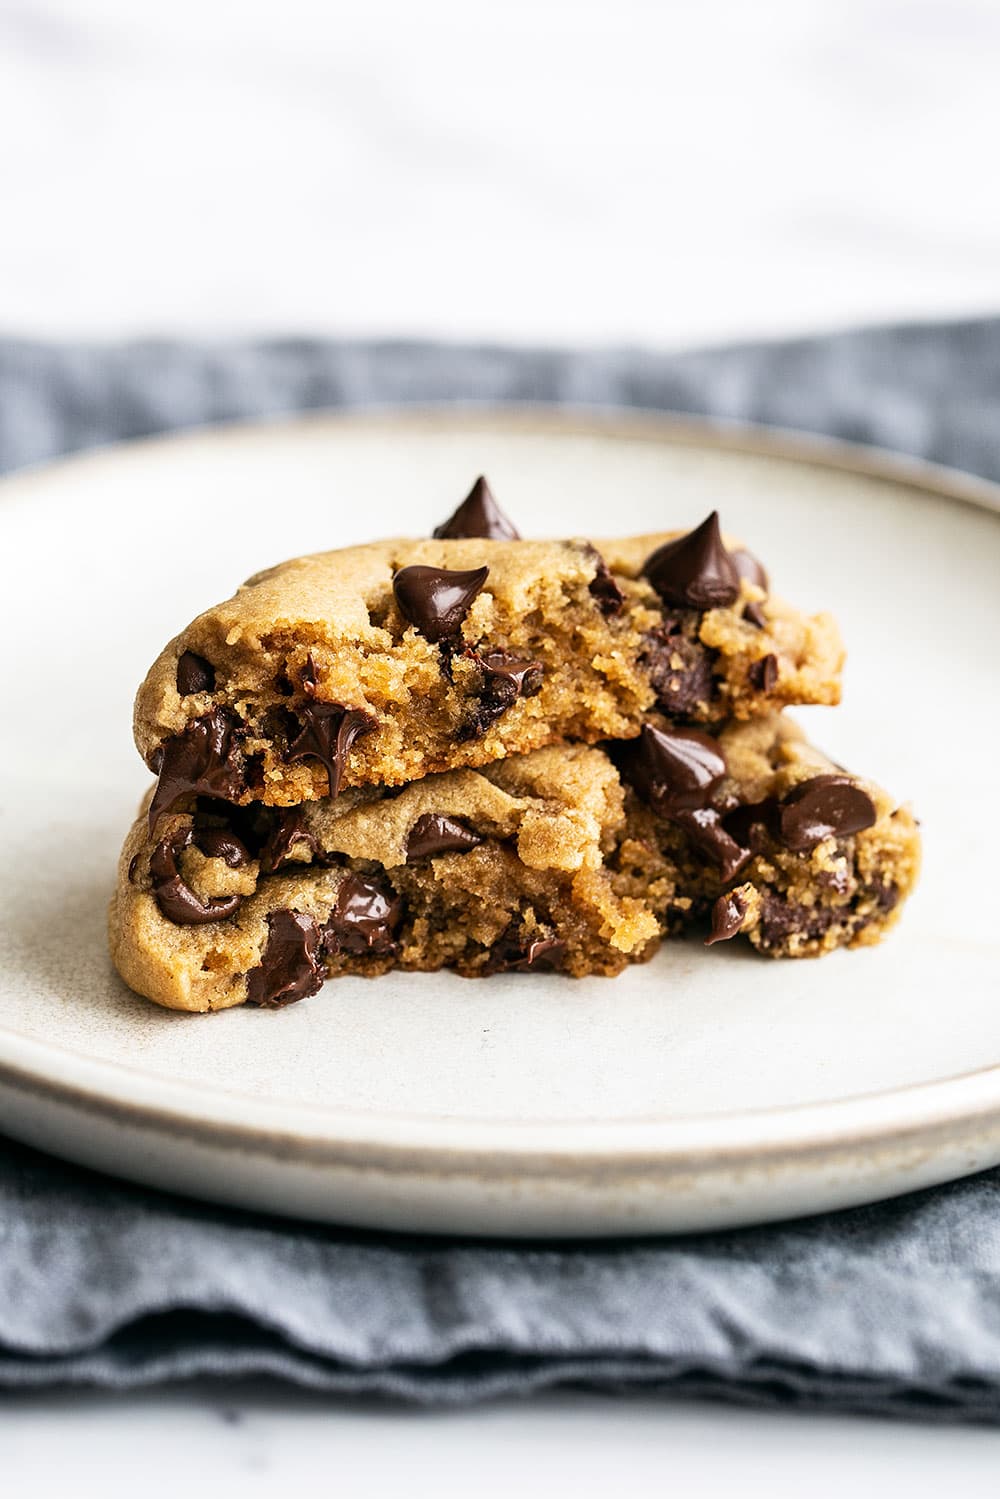 Gooey and soft peanut butter chocolate chip cookies - no electric mixer needed!